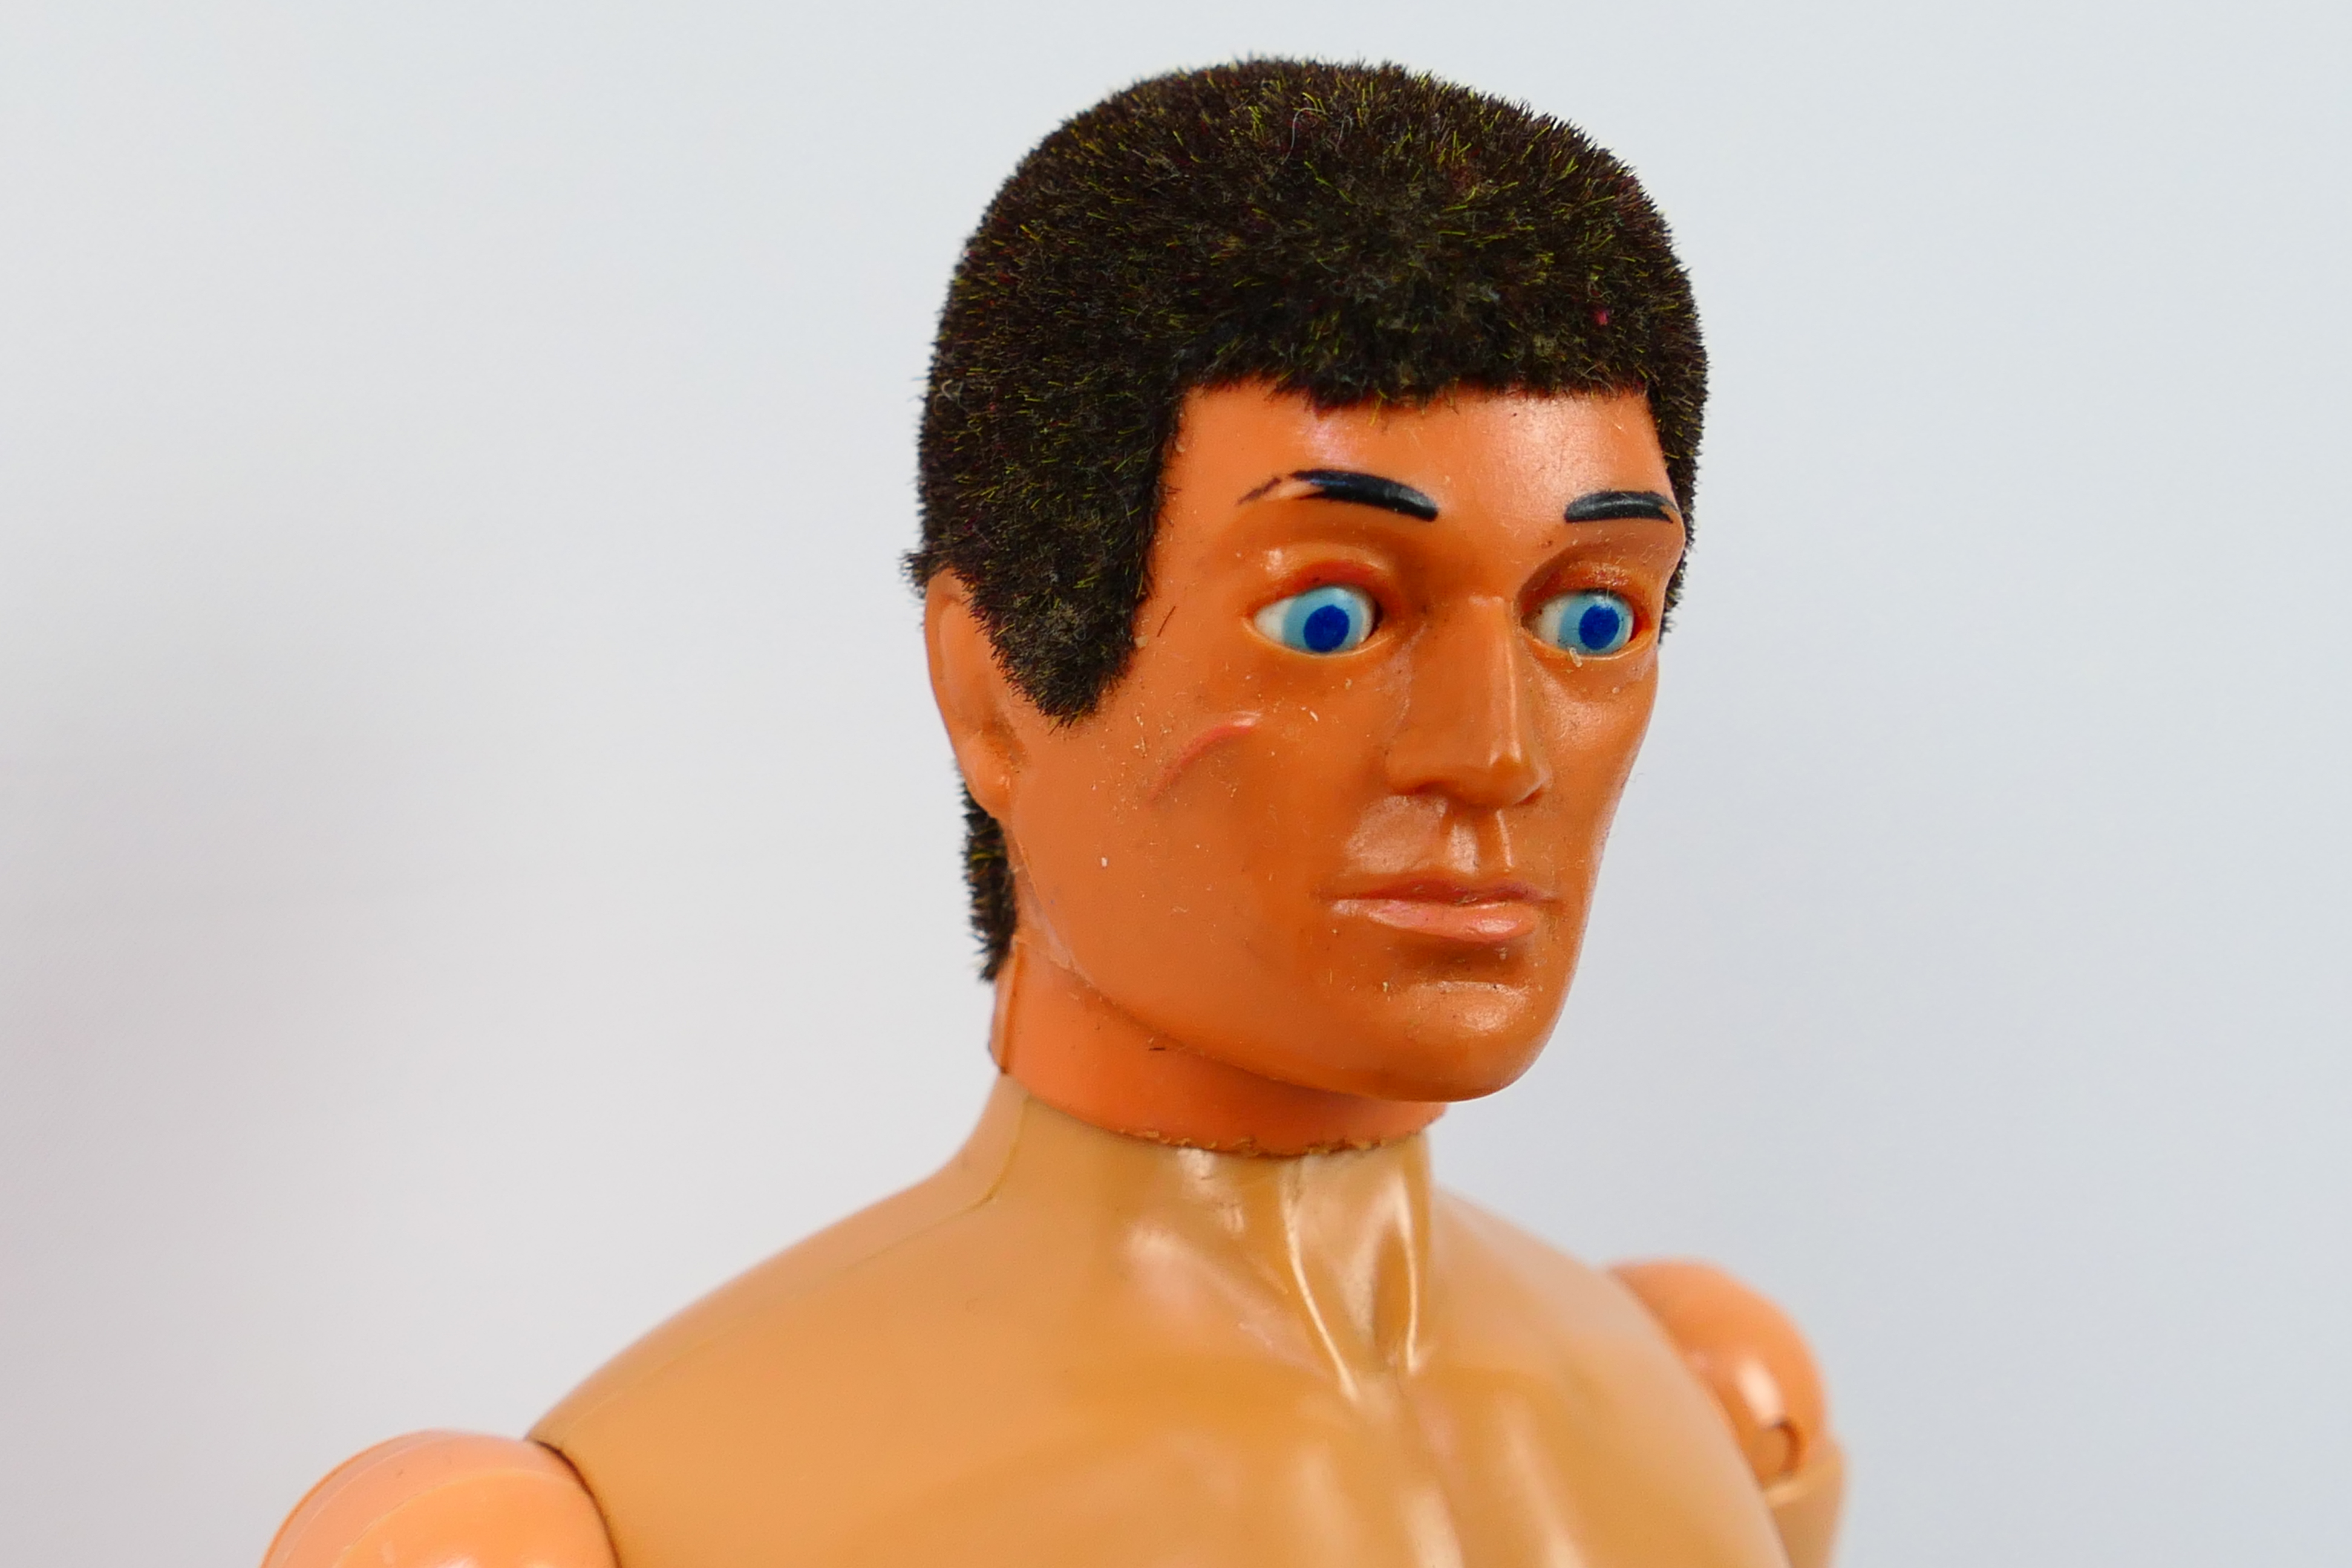 Palitoy - Action Man - An unboxed 1978 Action Man action figure with Flock hair, - Image 6 of 12